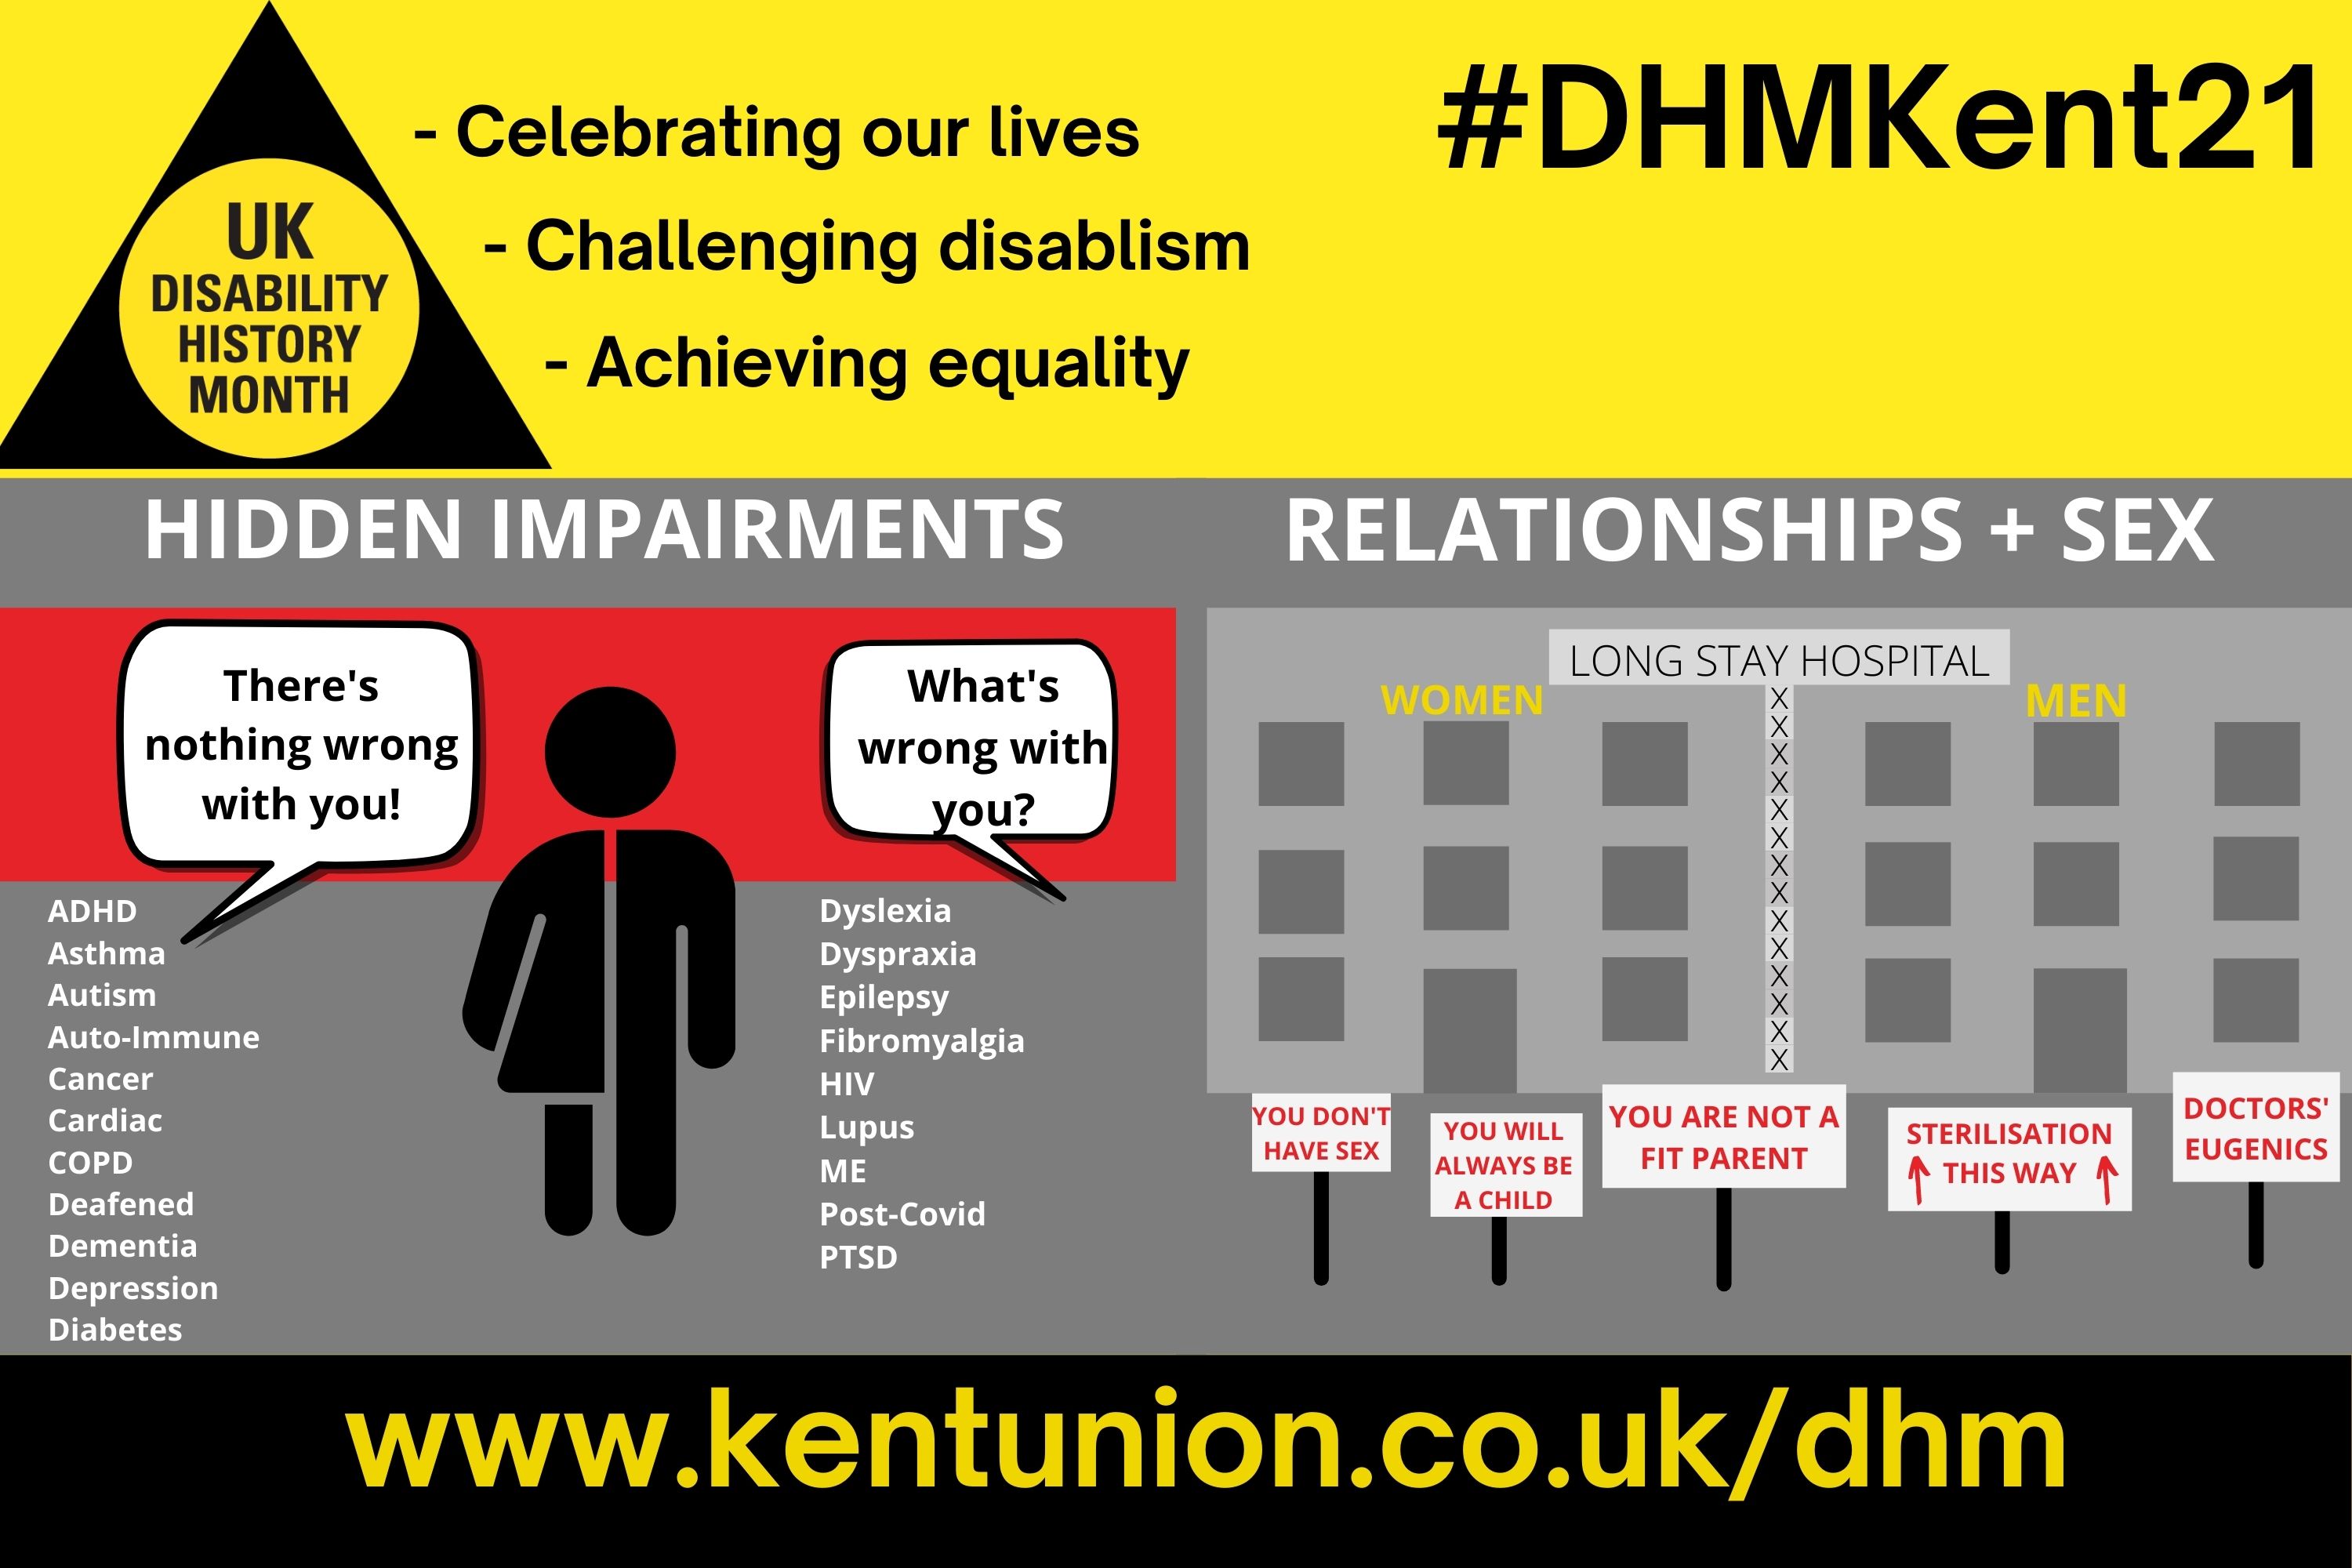 Disability History Month graphic showing hidden impairments and relationships